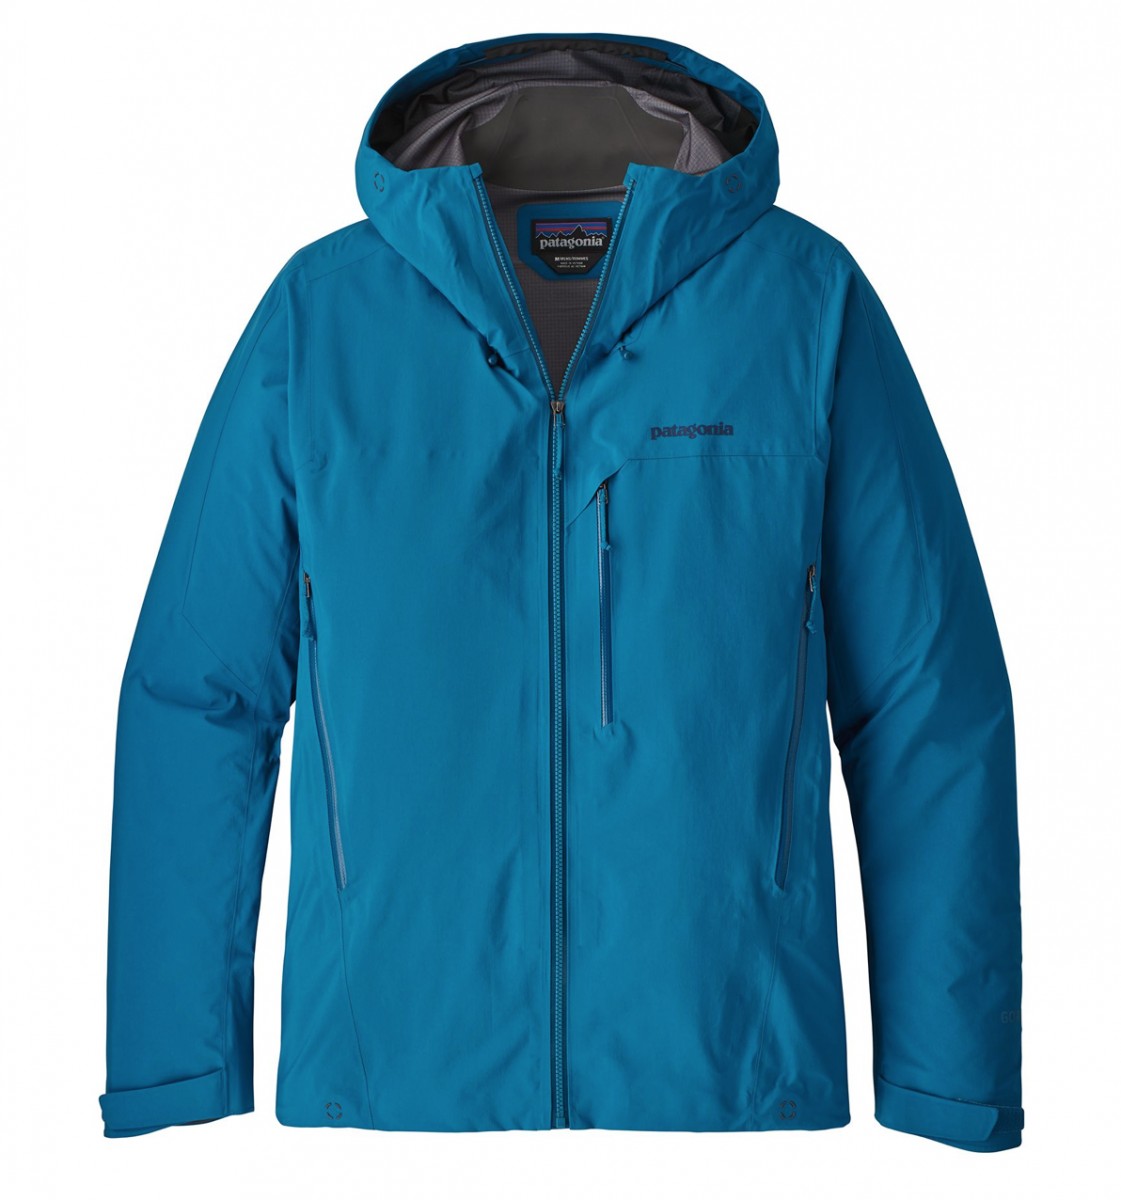 Patagonia Pluma Review | Tested by GearLab